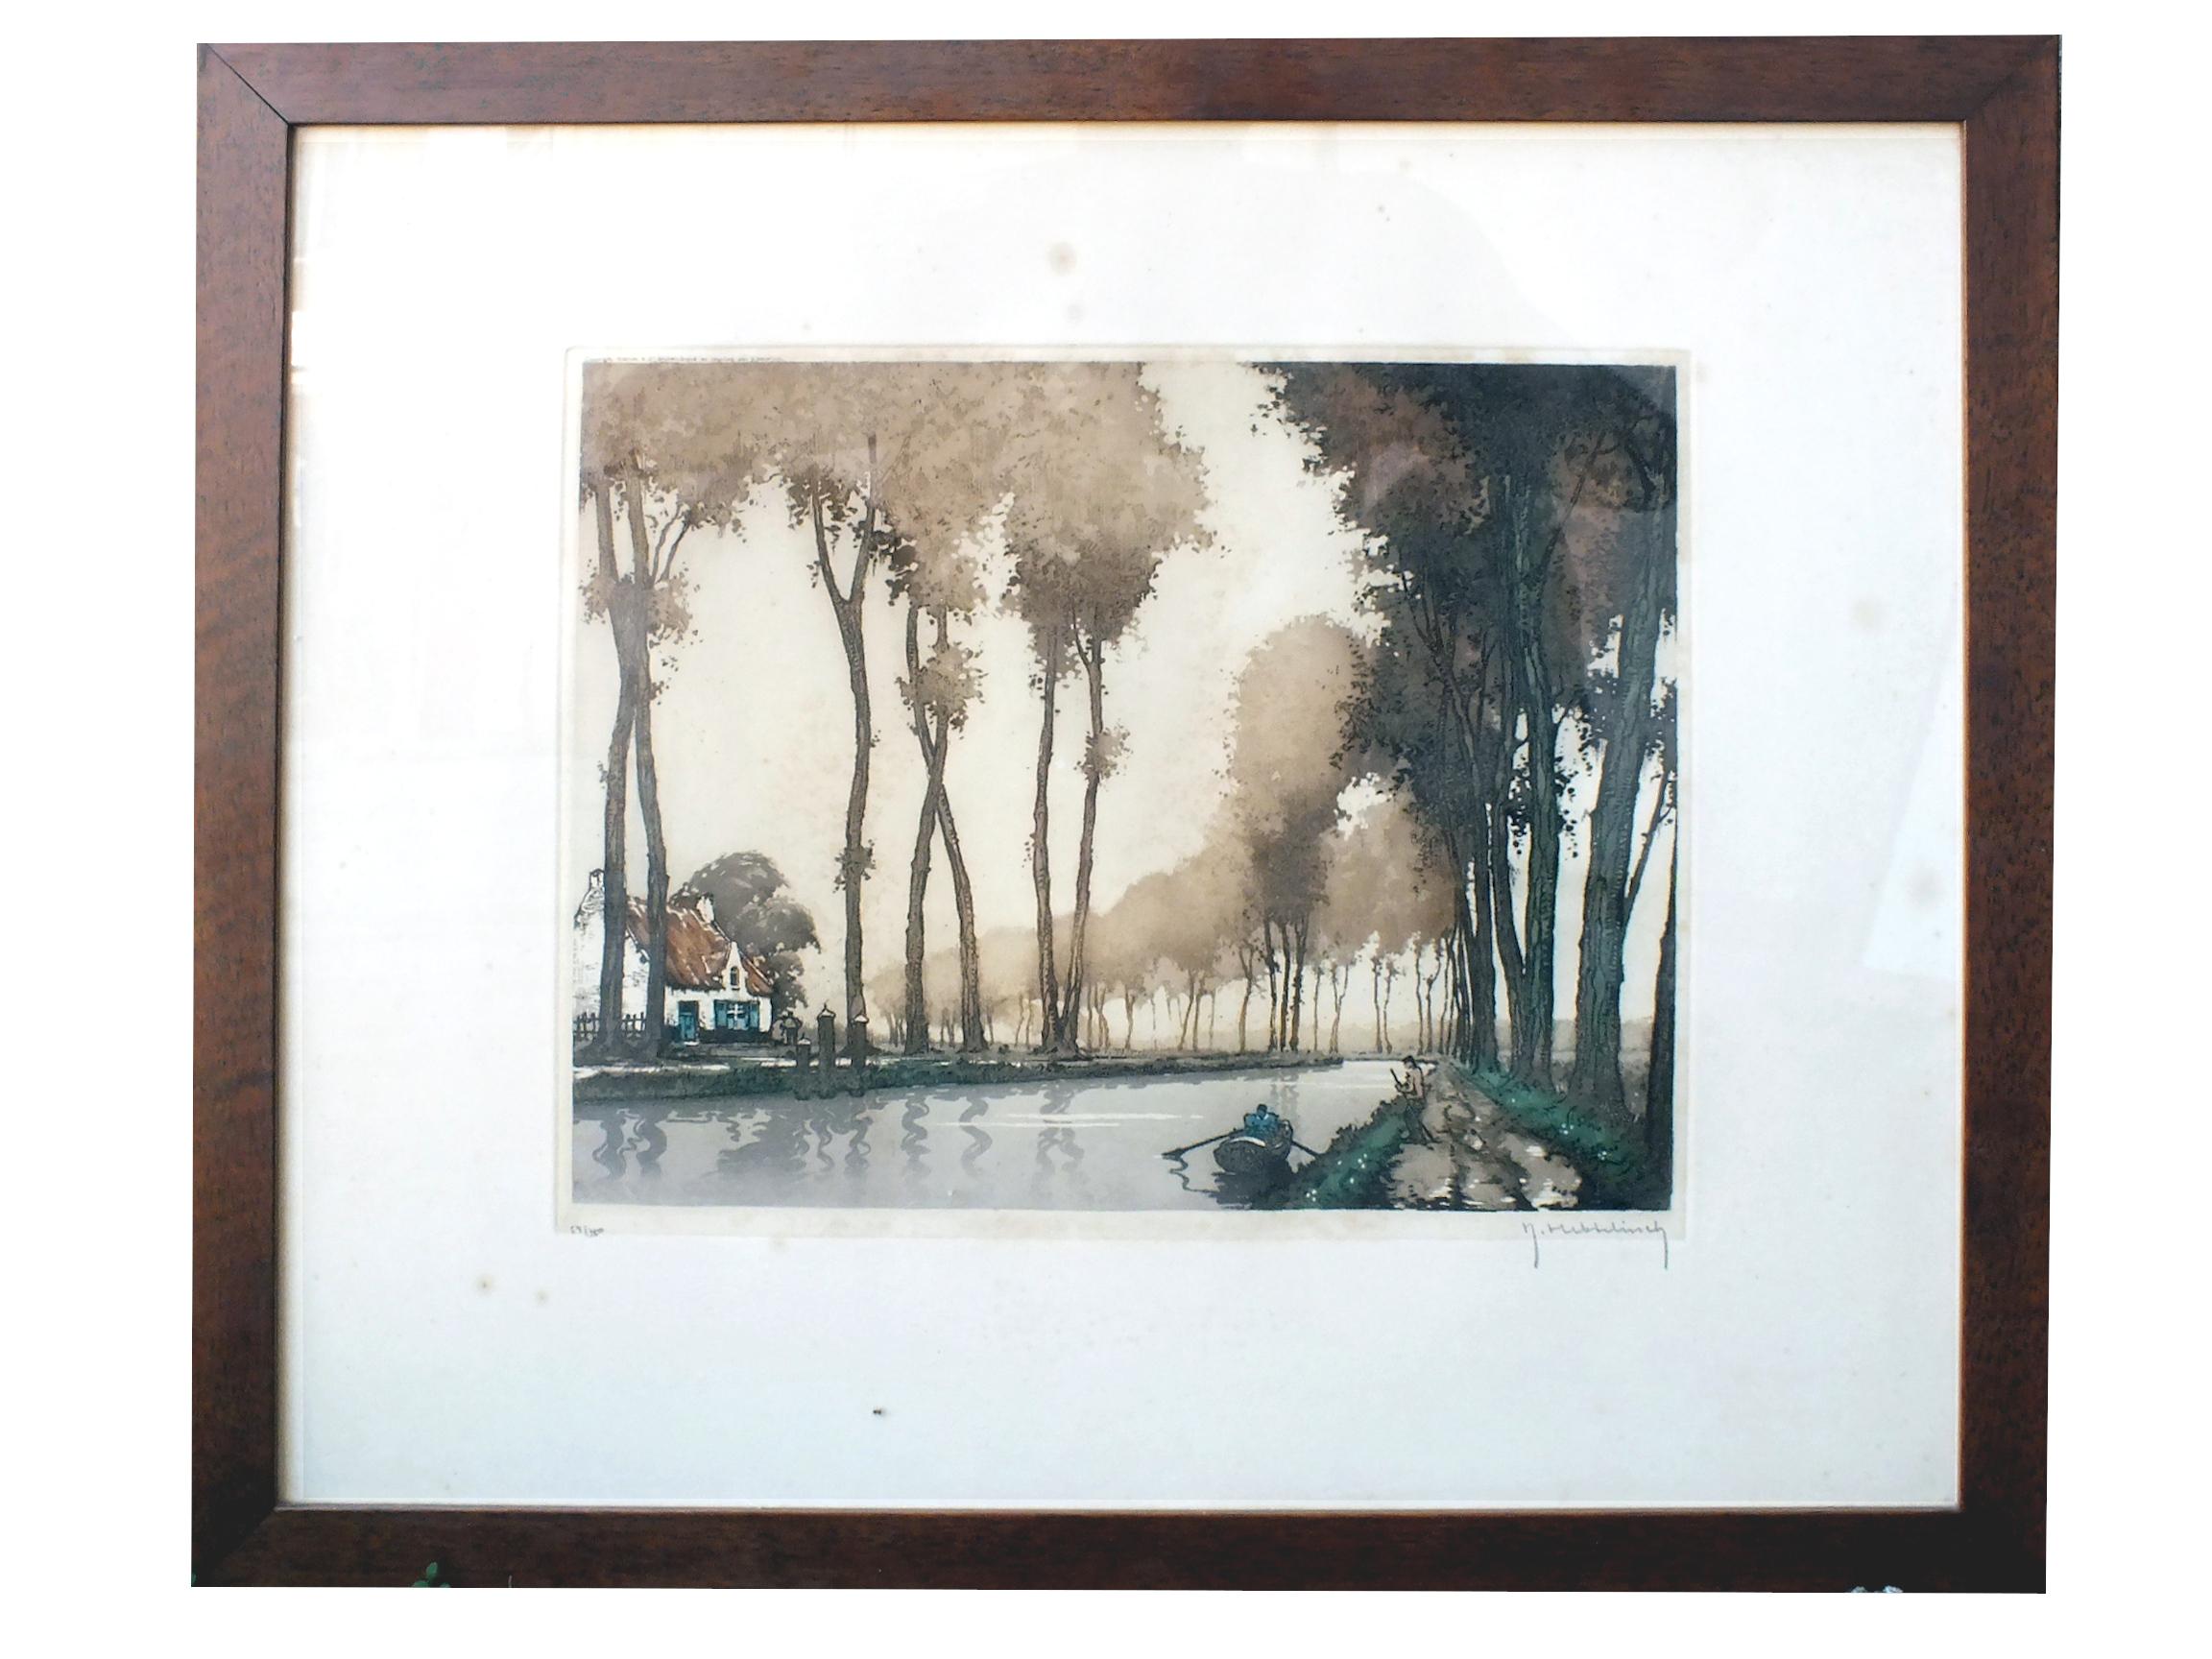 Hebbelinck Roger Belgio 1912 /1987 canal du midi' etching on paper aquatint years 1950

signed by Dietrich & C. brussels grave' et imprime' par Hebbelinck Roger

 the etching is in good condition with very light sign of time, 

 refined